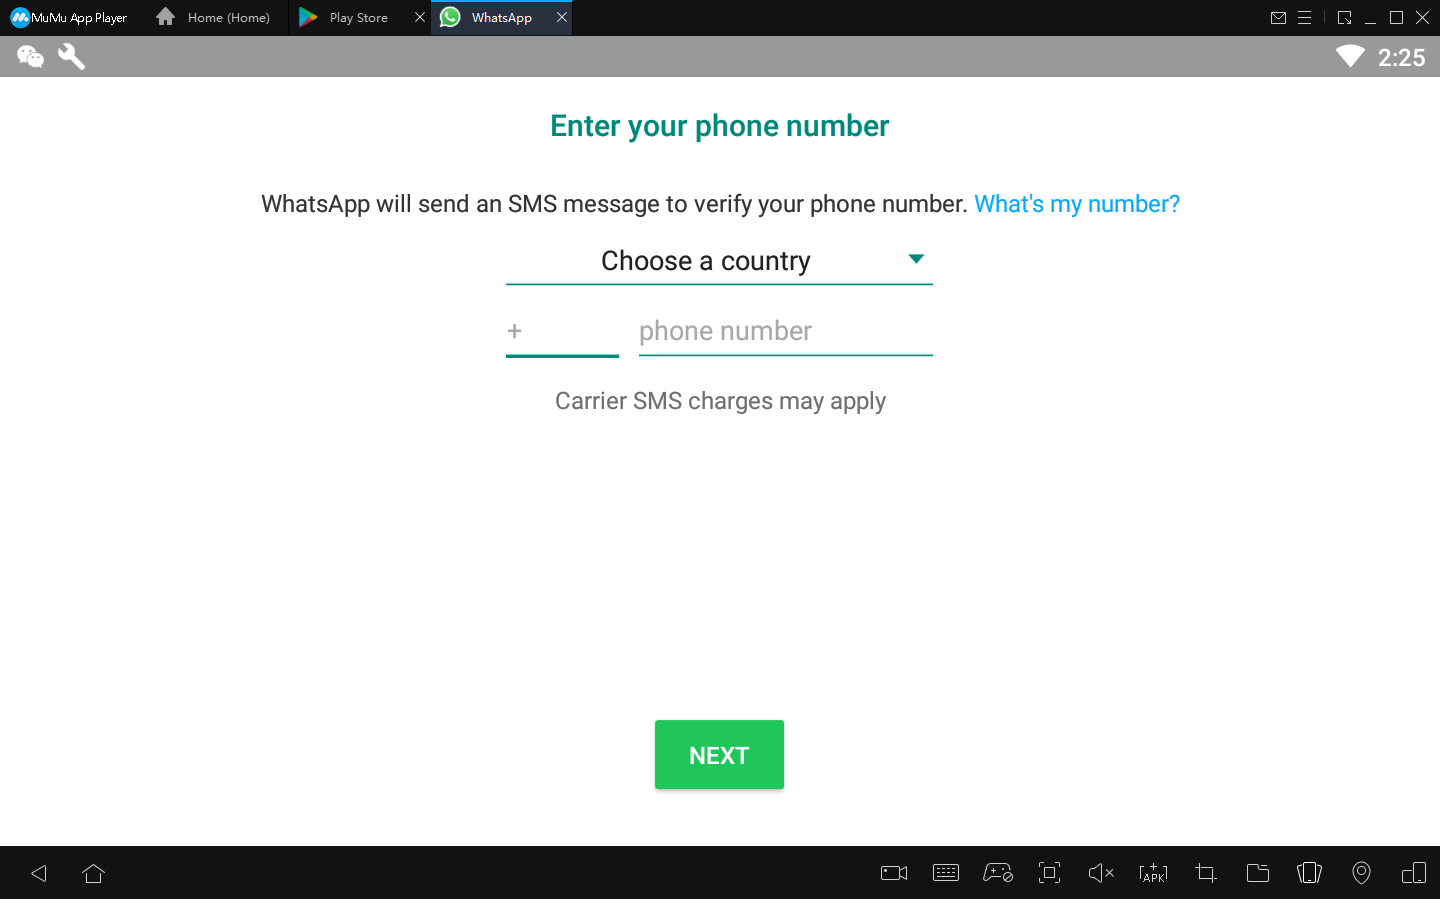 How to log in to WhatsApp with MuMu Player on PC5